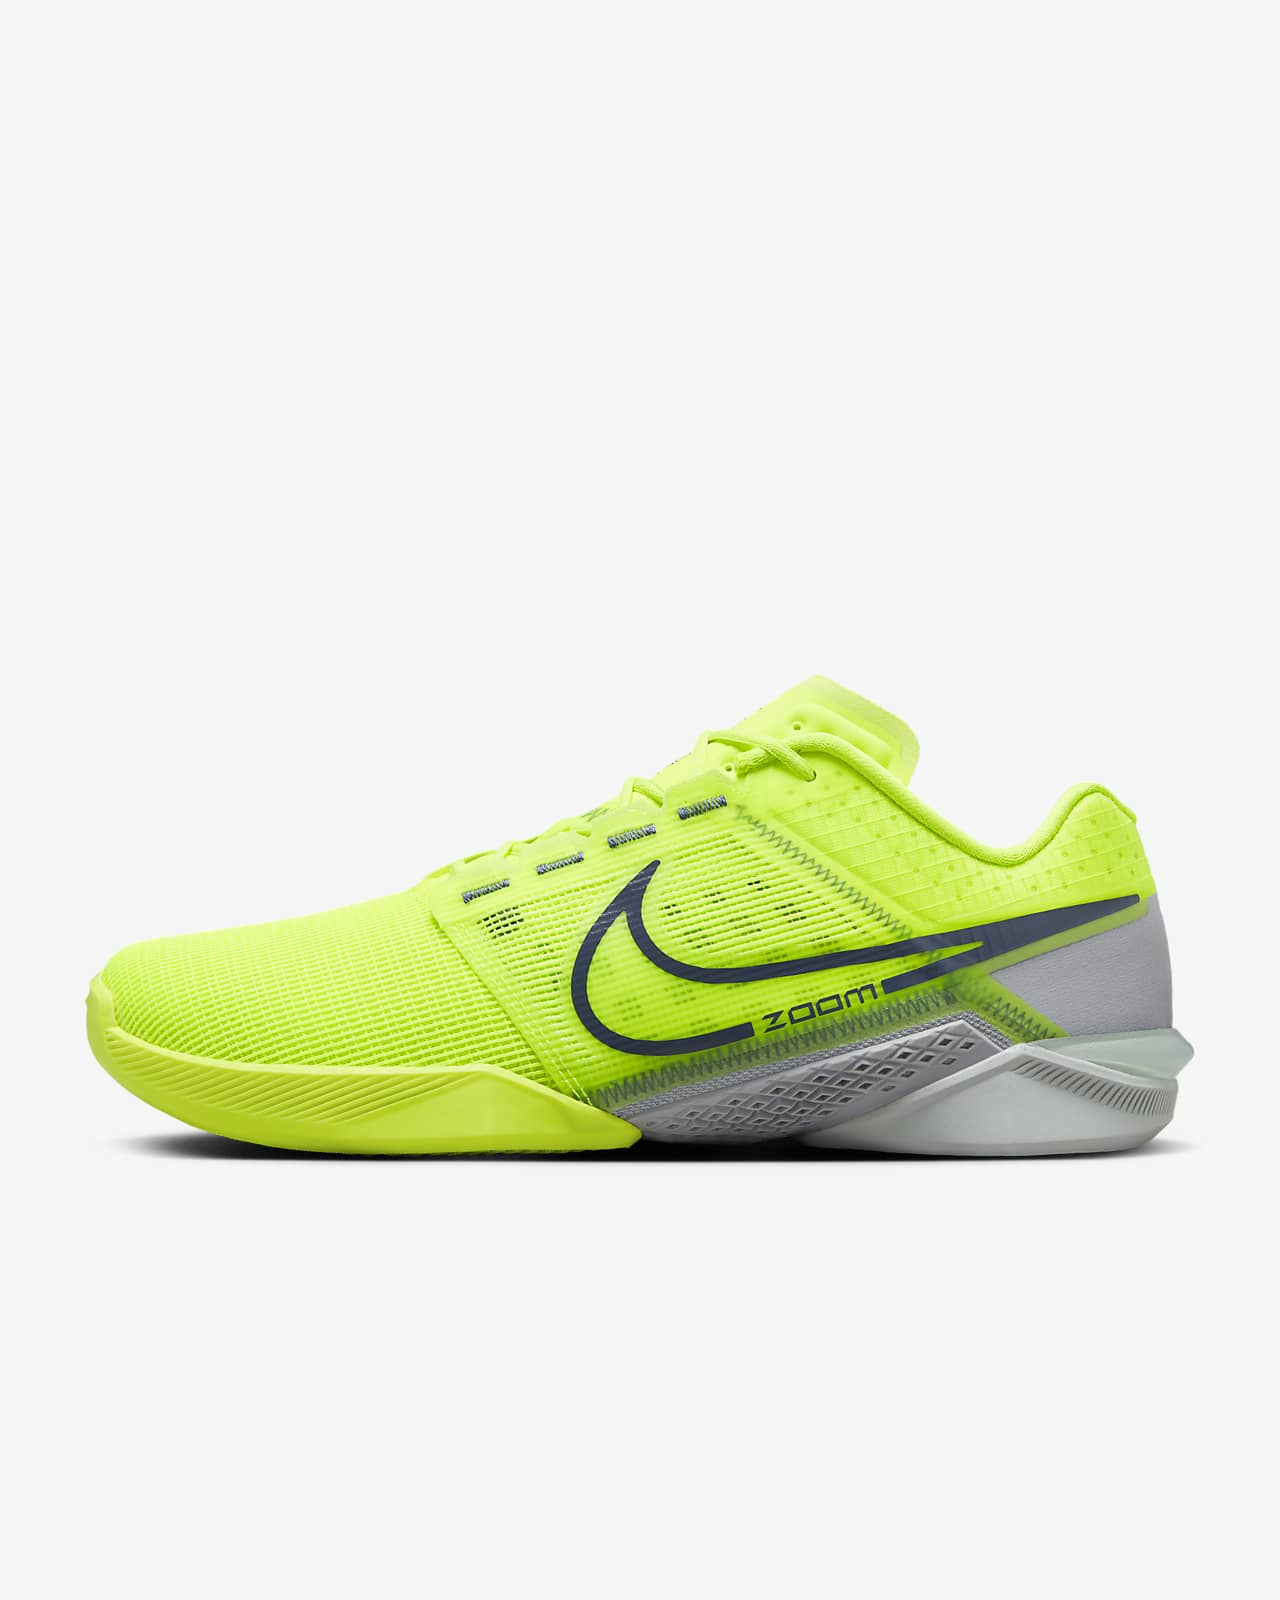 Chaussure de training Nike Zoom Metcon Turbo 2 pour Homme